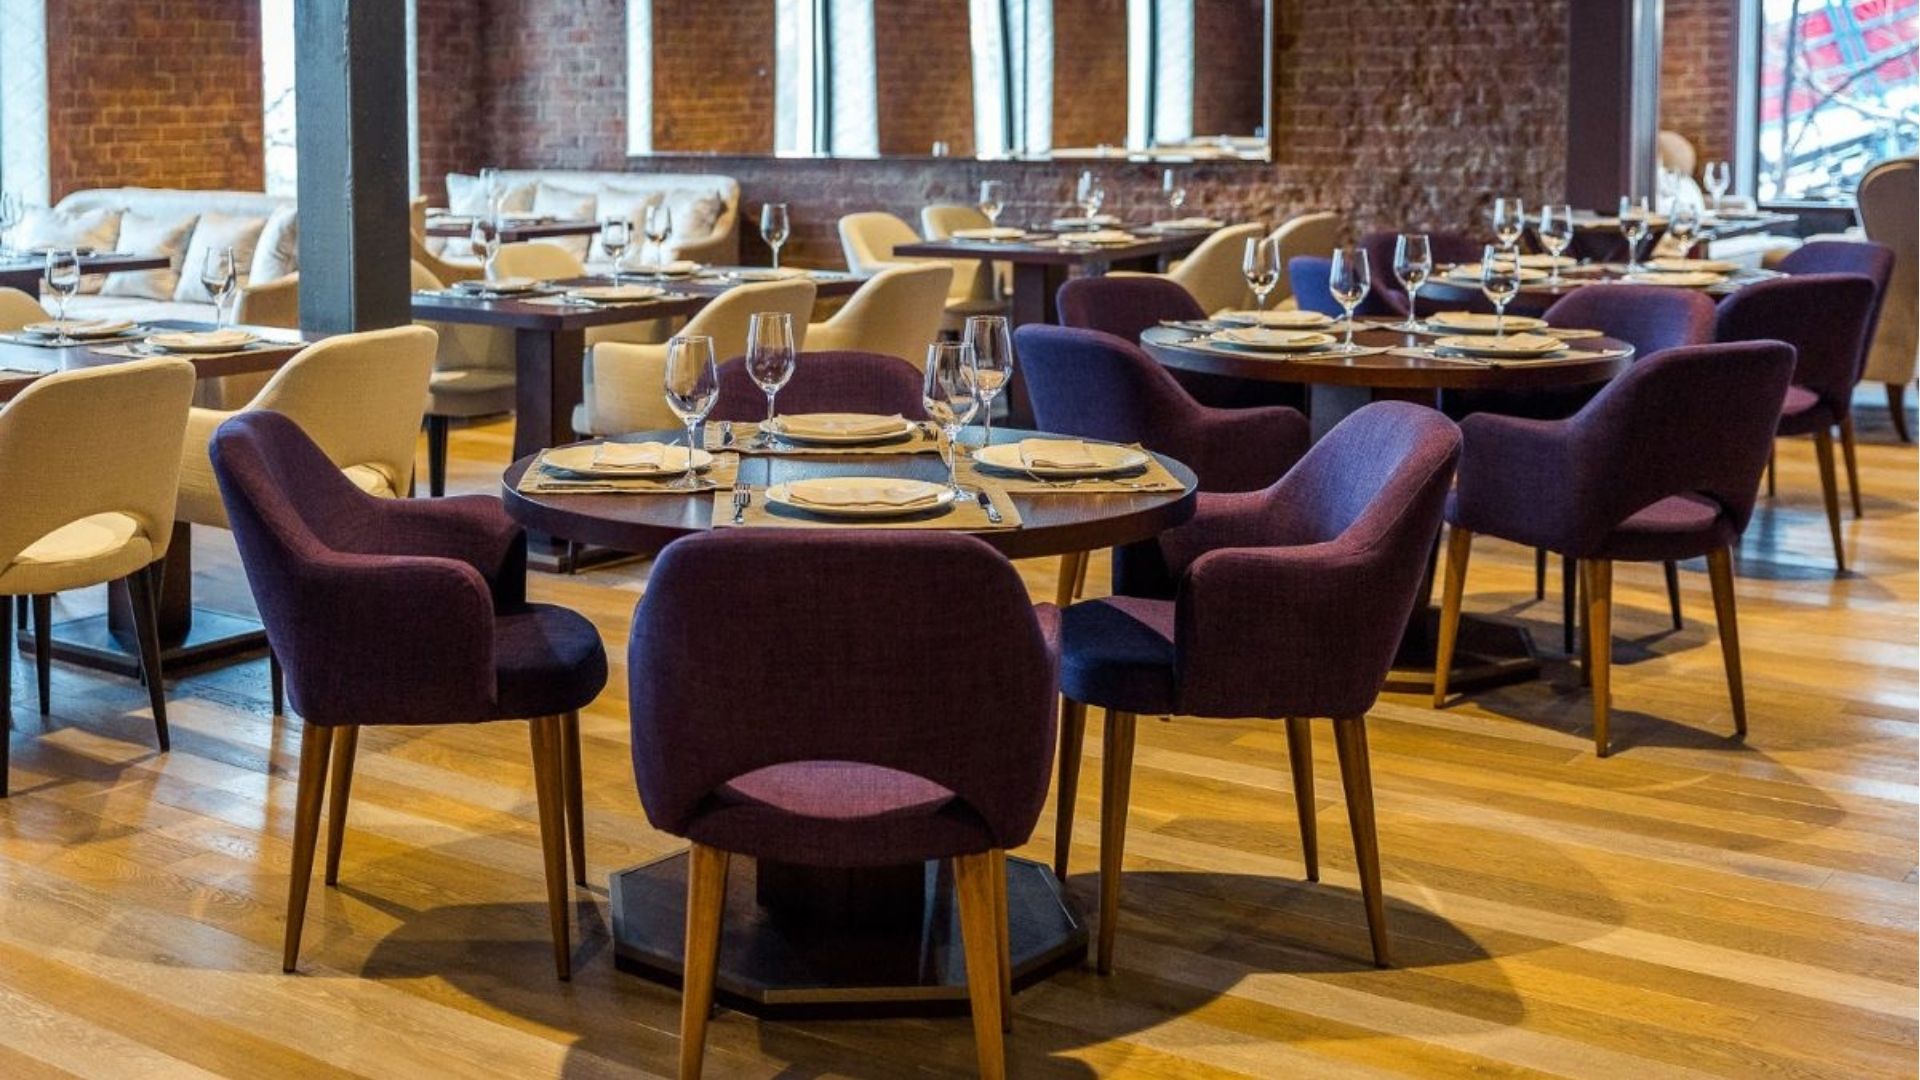 Restaurant Chairs for Sale- Tips to Choose the Right Restaurant Chairs